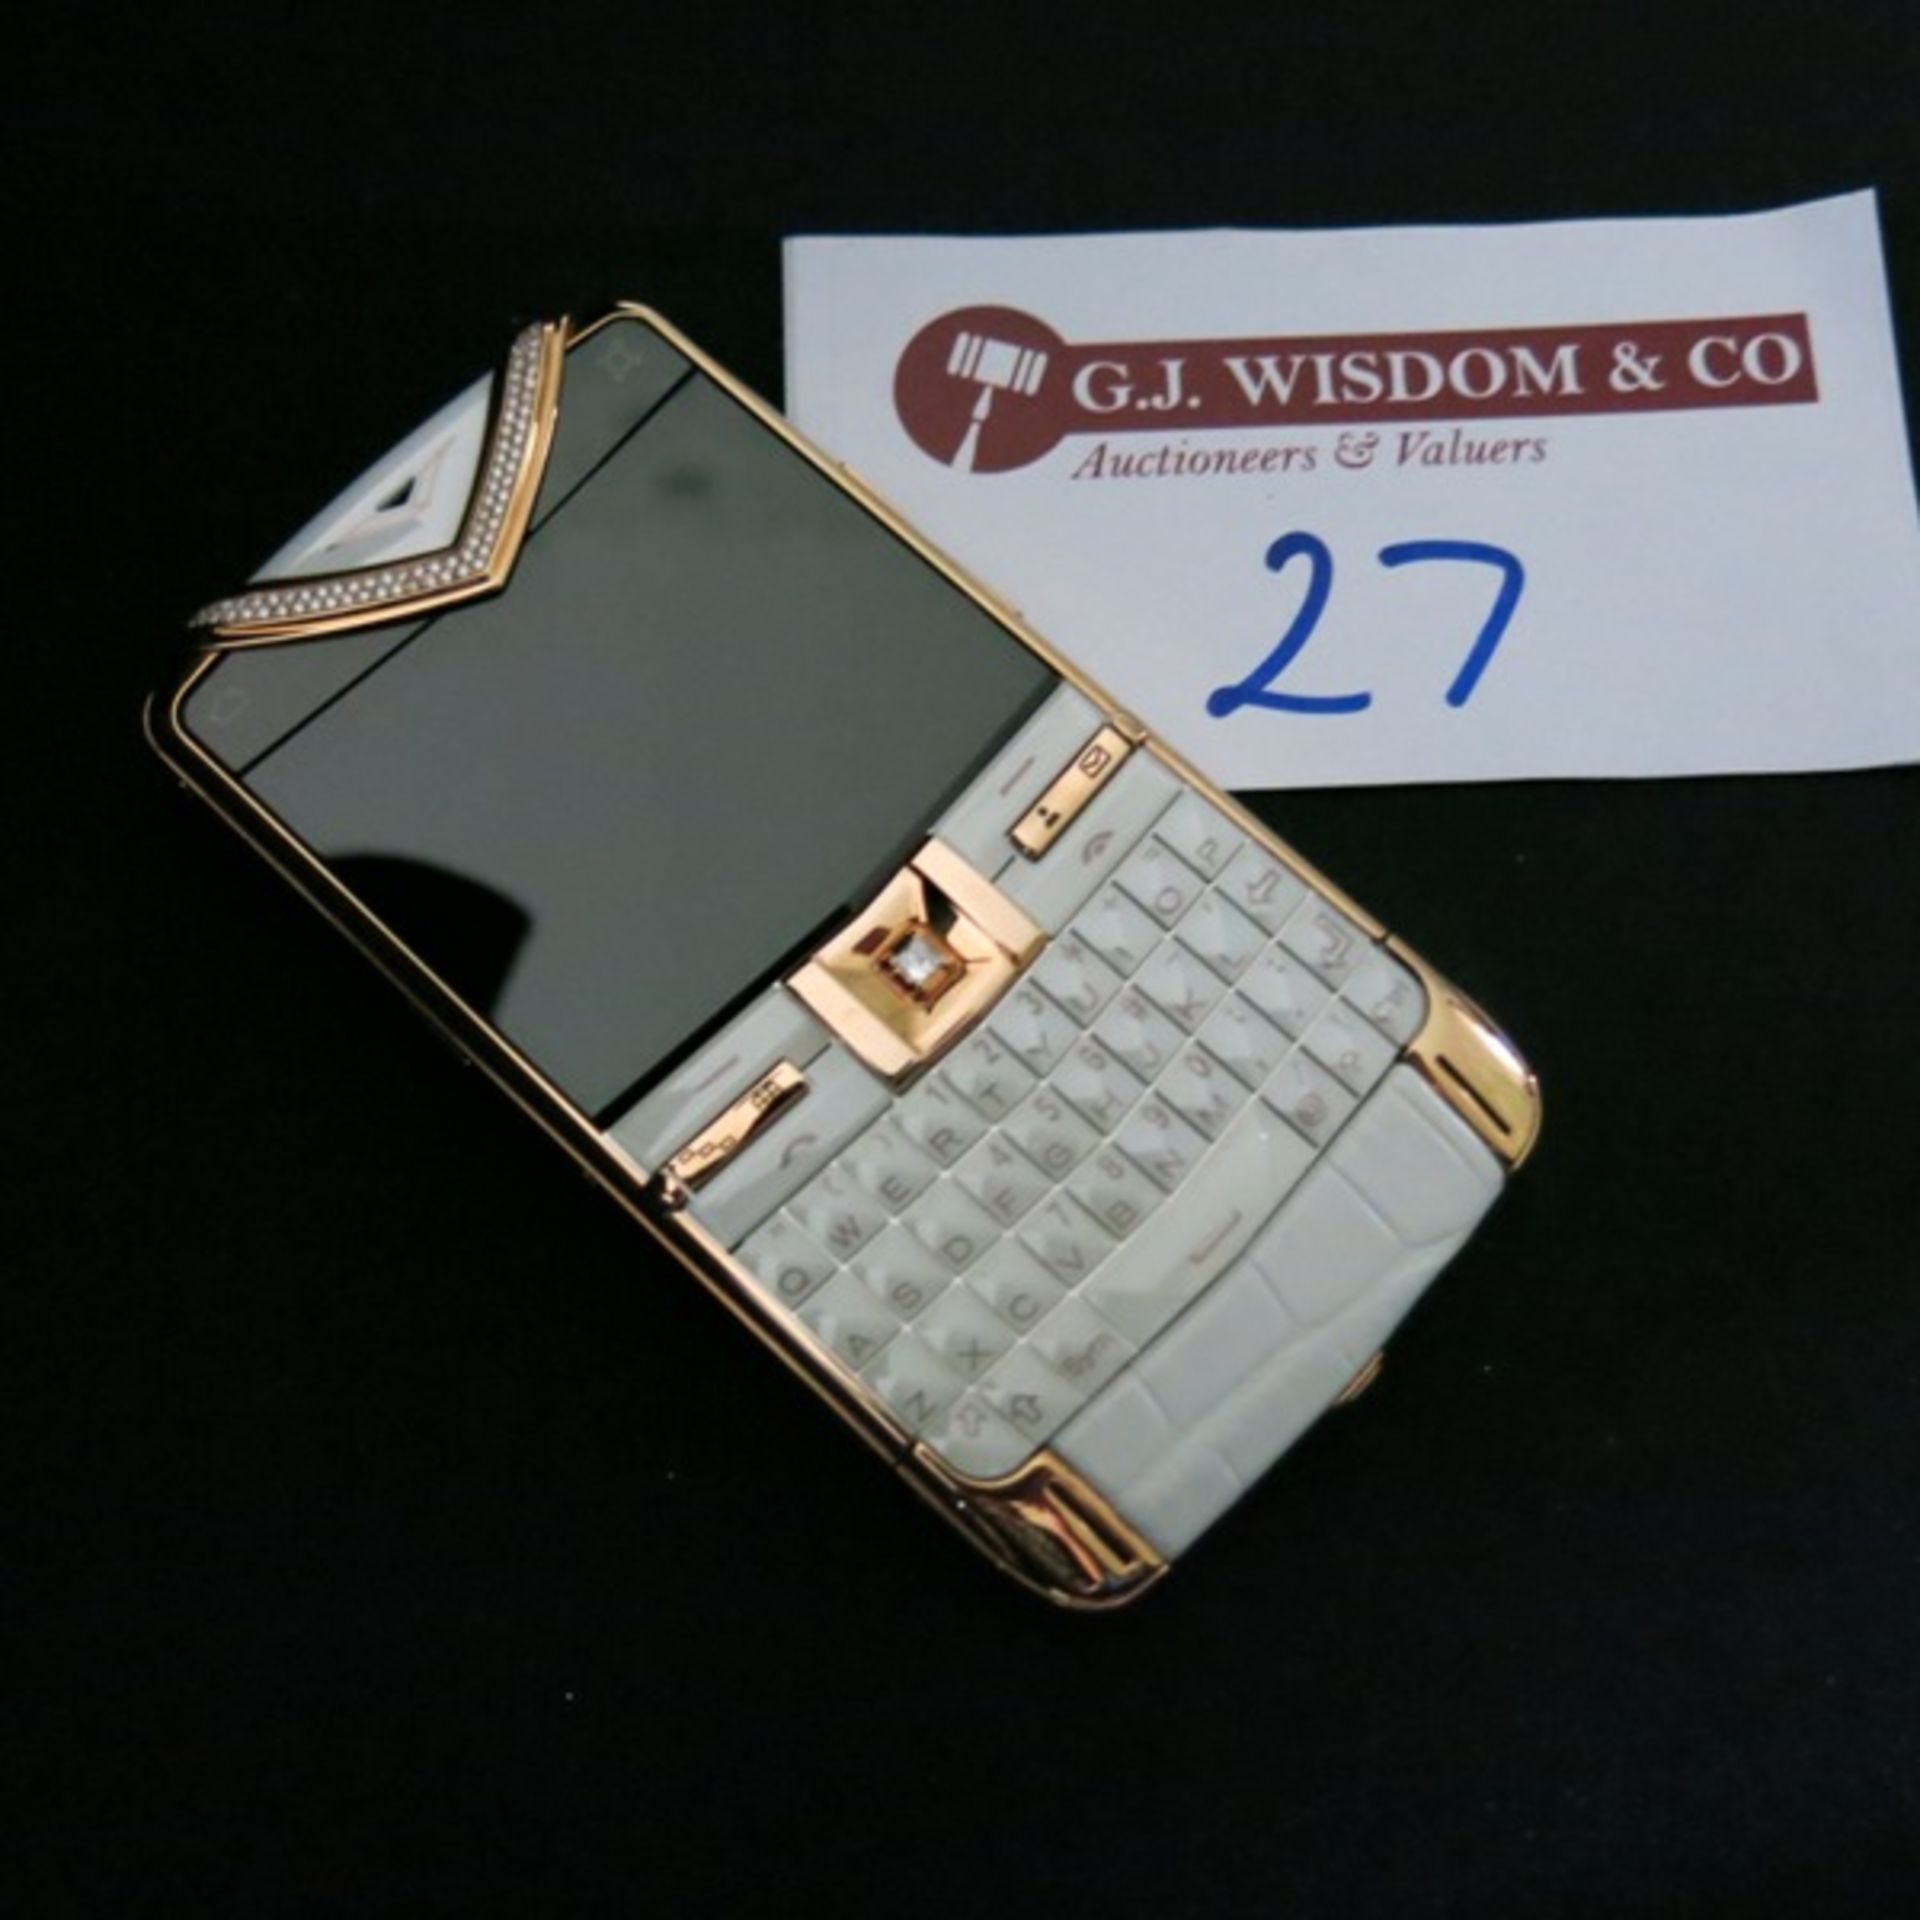 Vertu Constellation Quest Phone in 18kt Red Gold with Diamond Pillow Trim & Diamond Select Key.